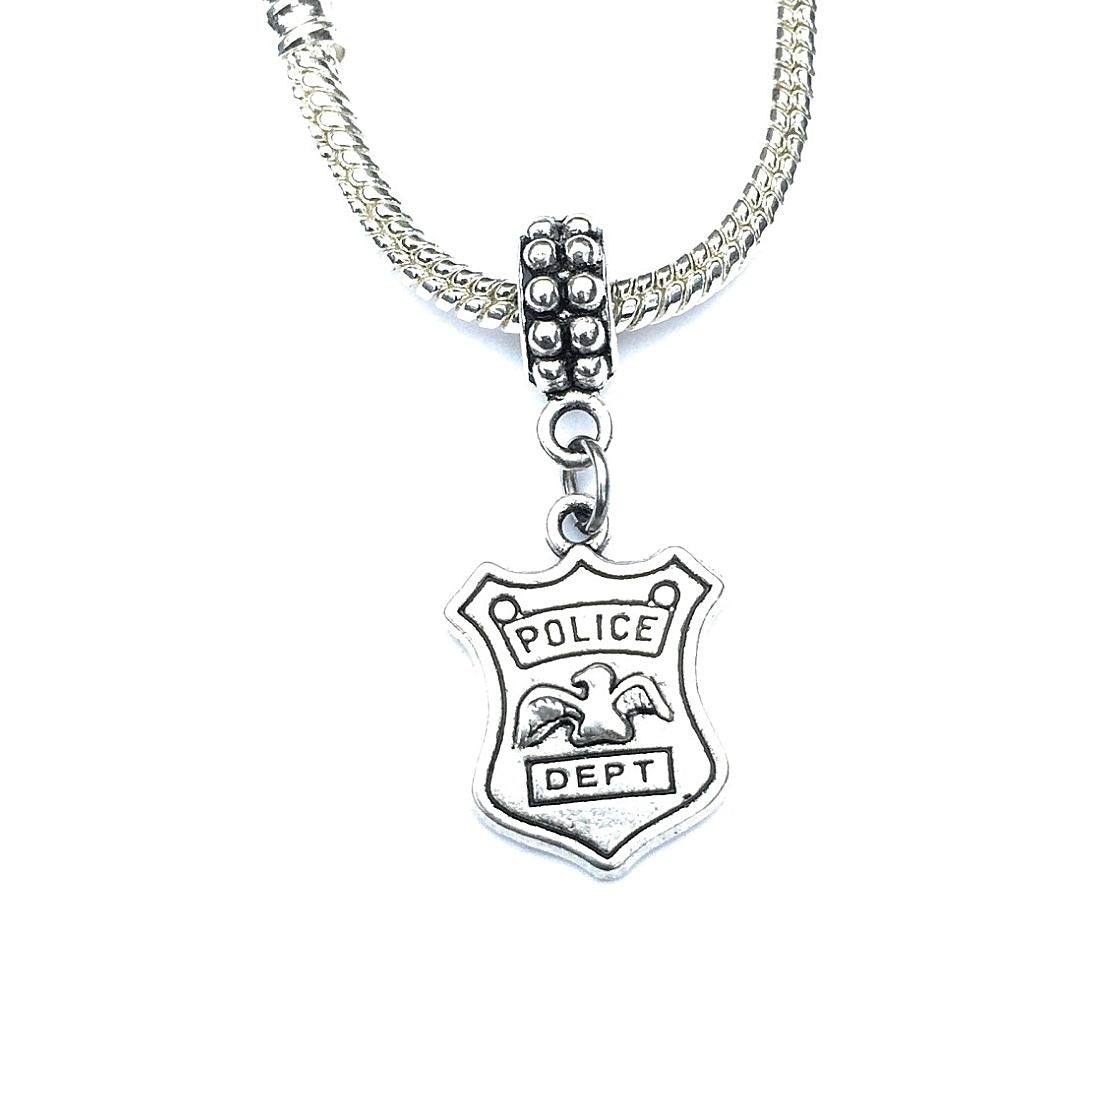 Handcrafted Silver PD Badge Charm Bead for Bracelet.